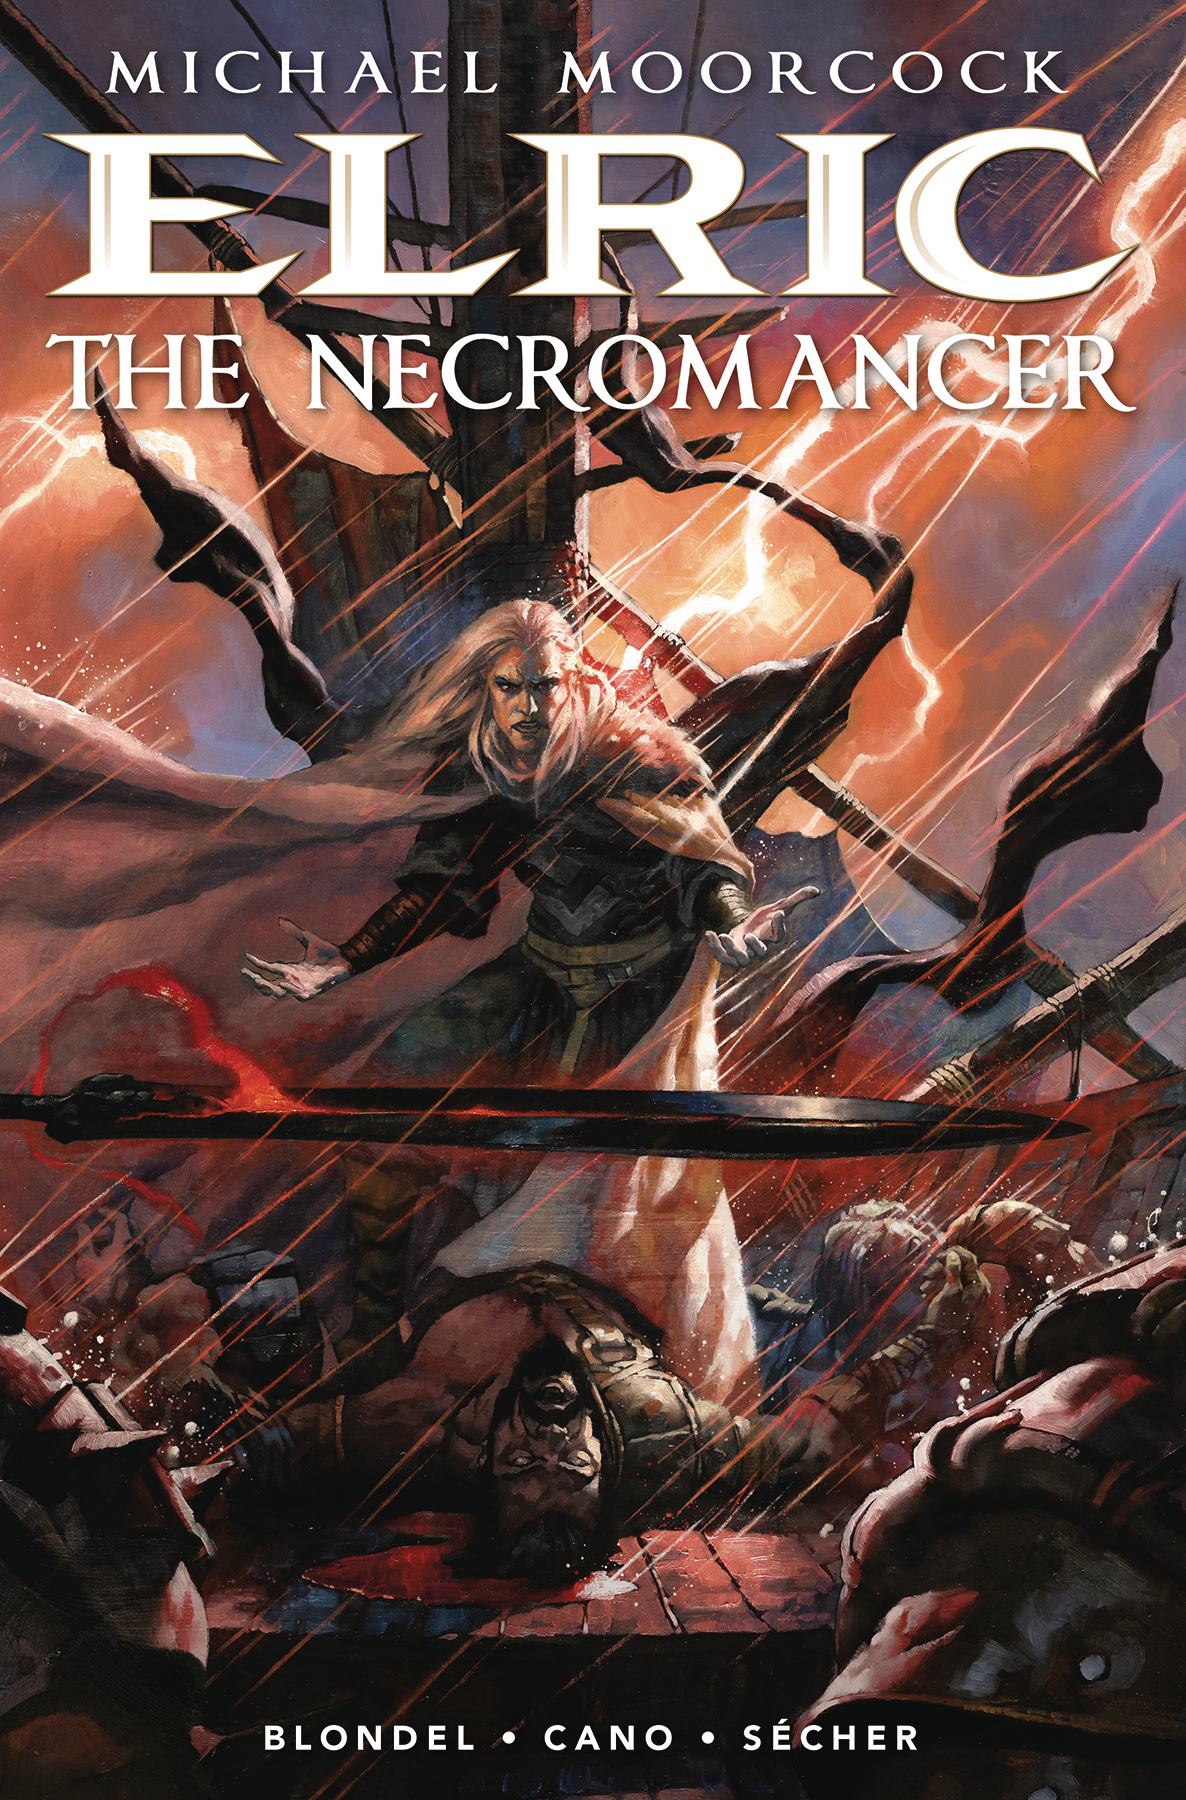 Elric the Necromancer #1 Cover A Secher (Mature) (Of 2)